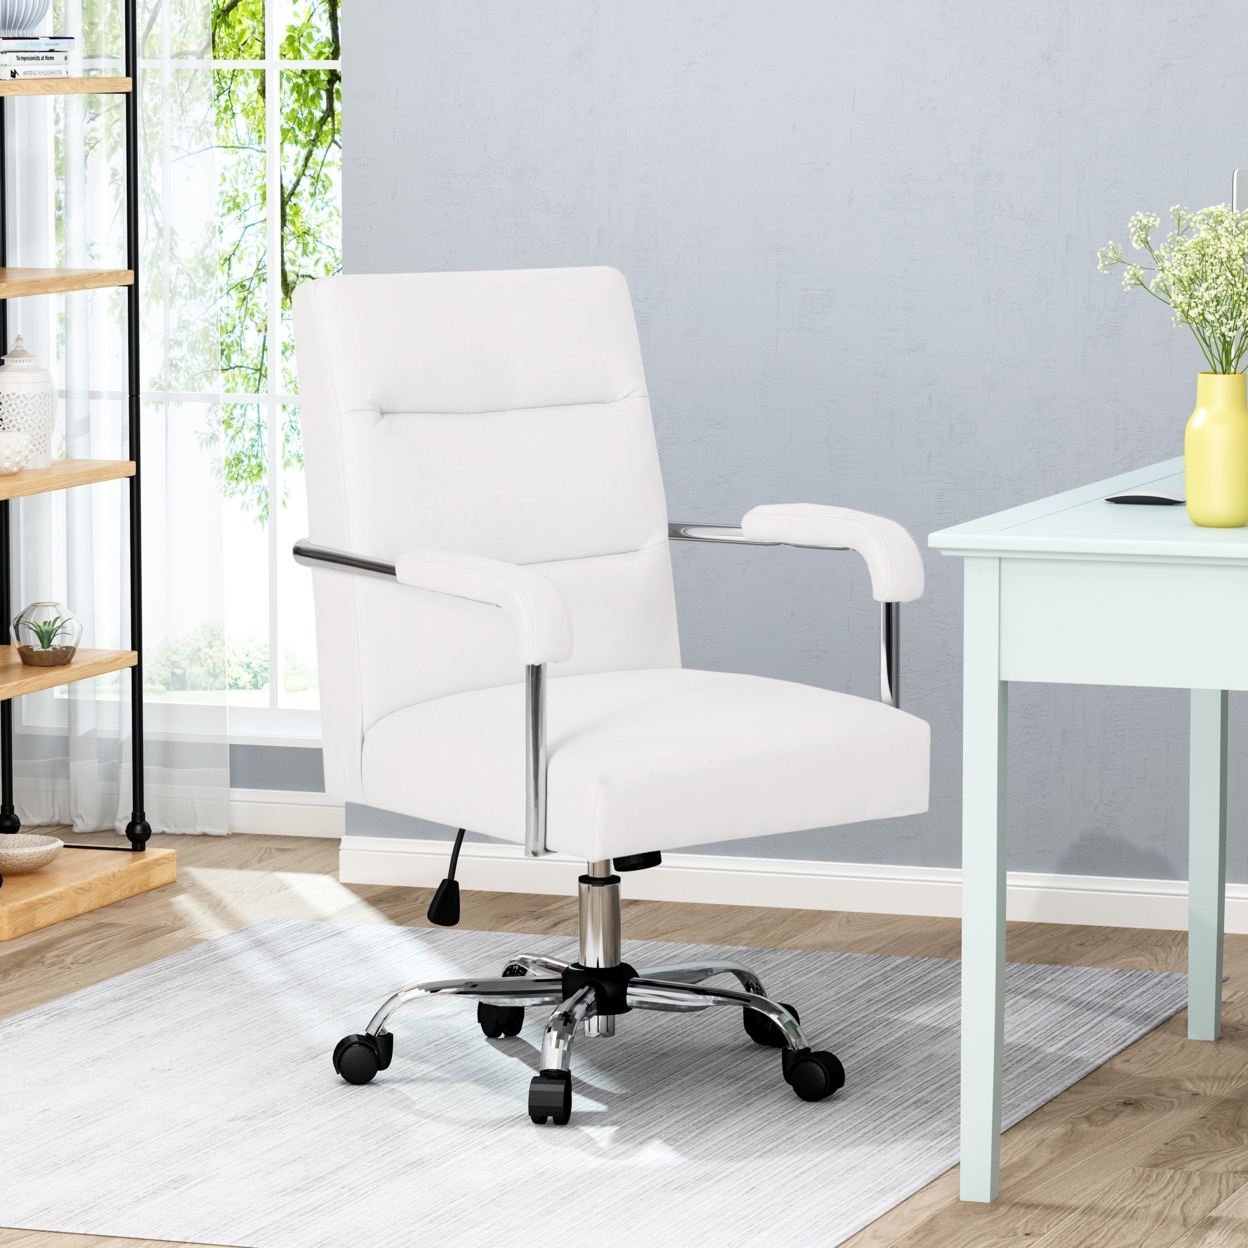 Elke Modern Channel Stitched Swivel Office Lift Chair - White